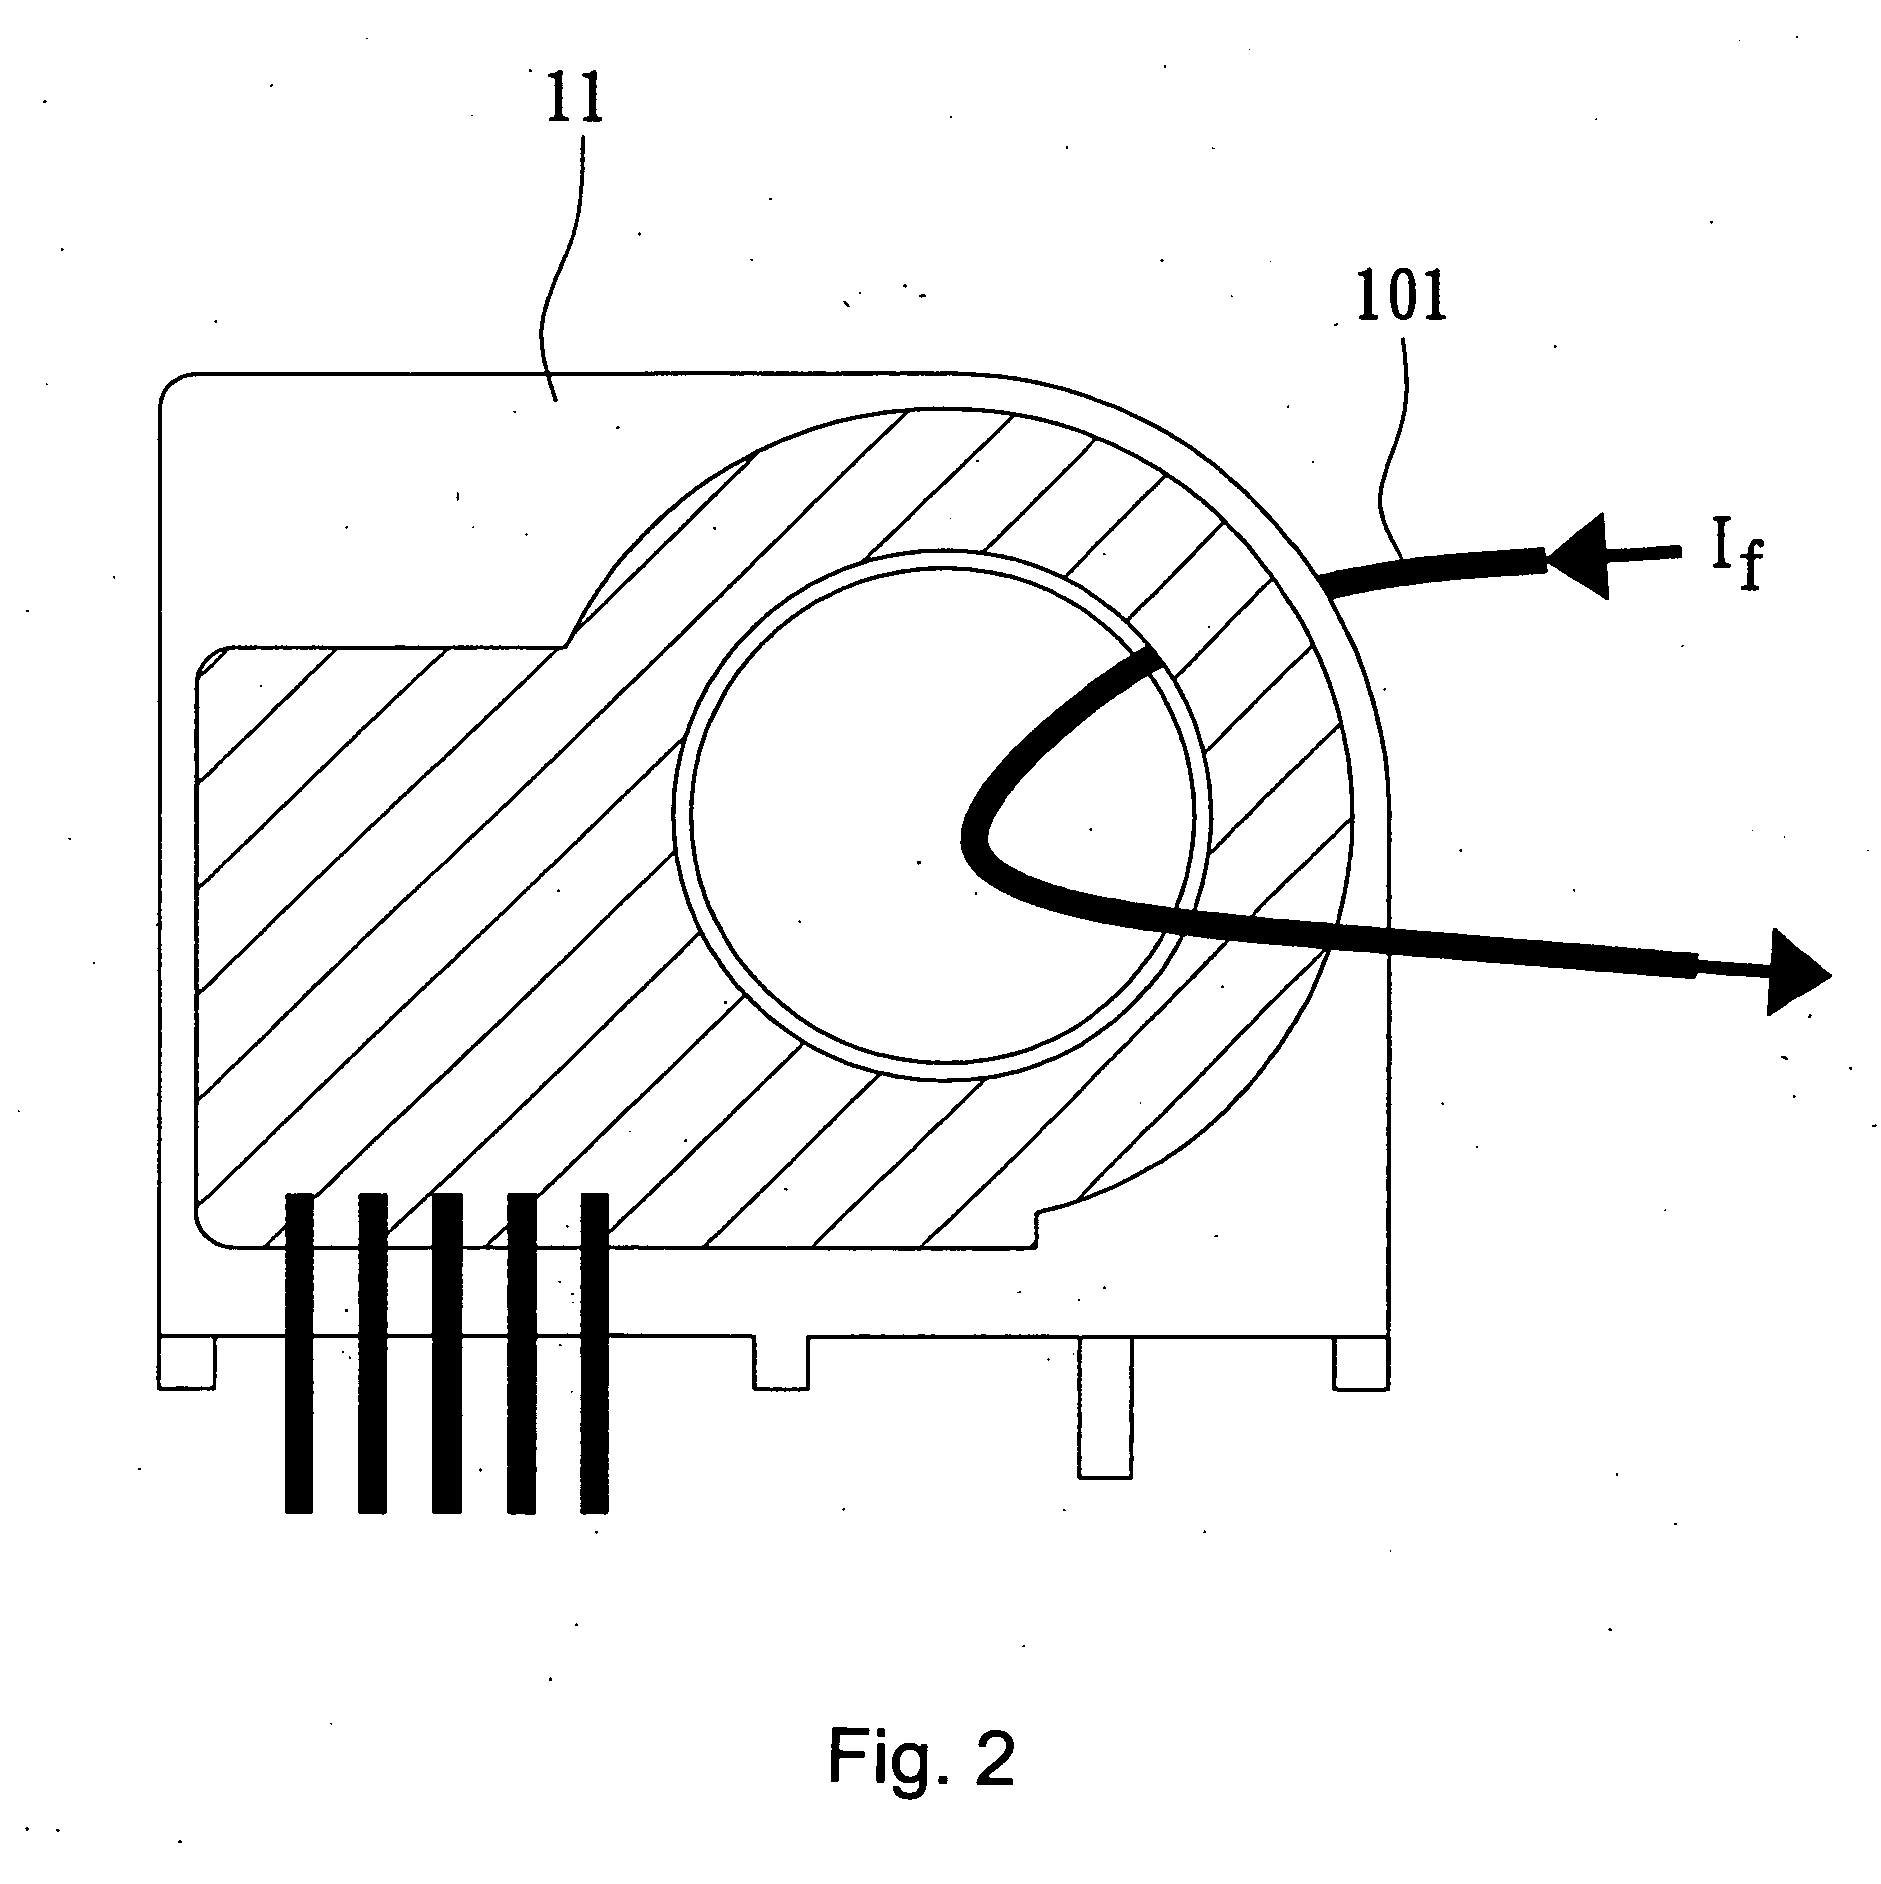 Motor overcurrent protection device